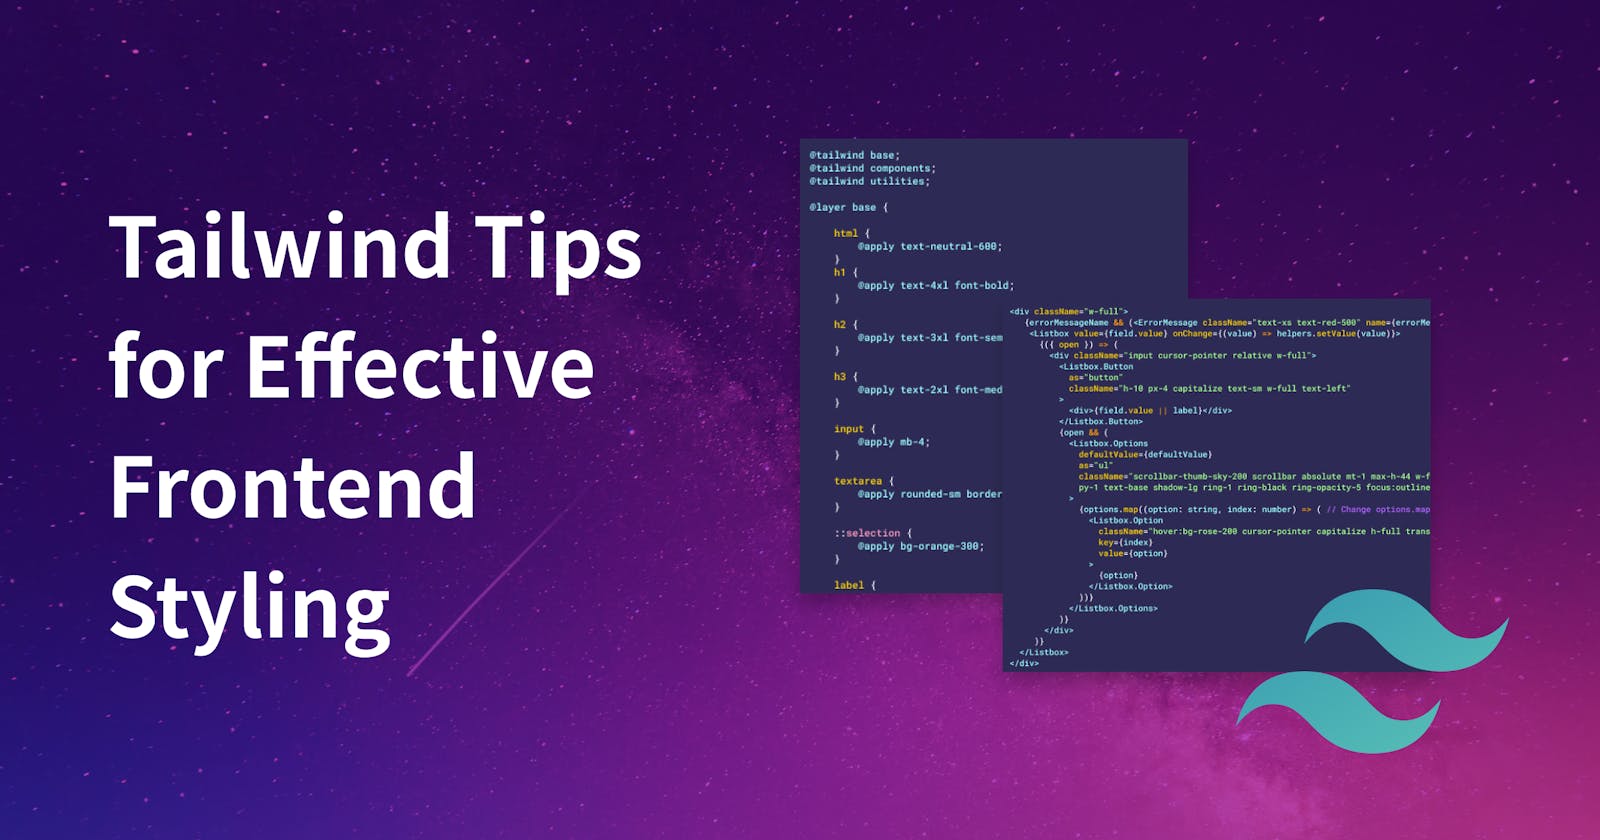 3 Tips for Using Tailwind for Effective Frontend Styling